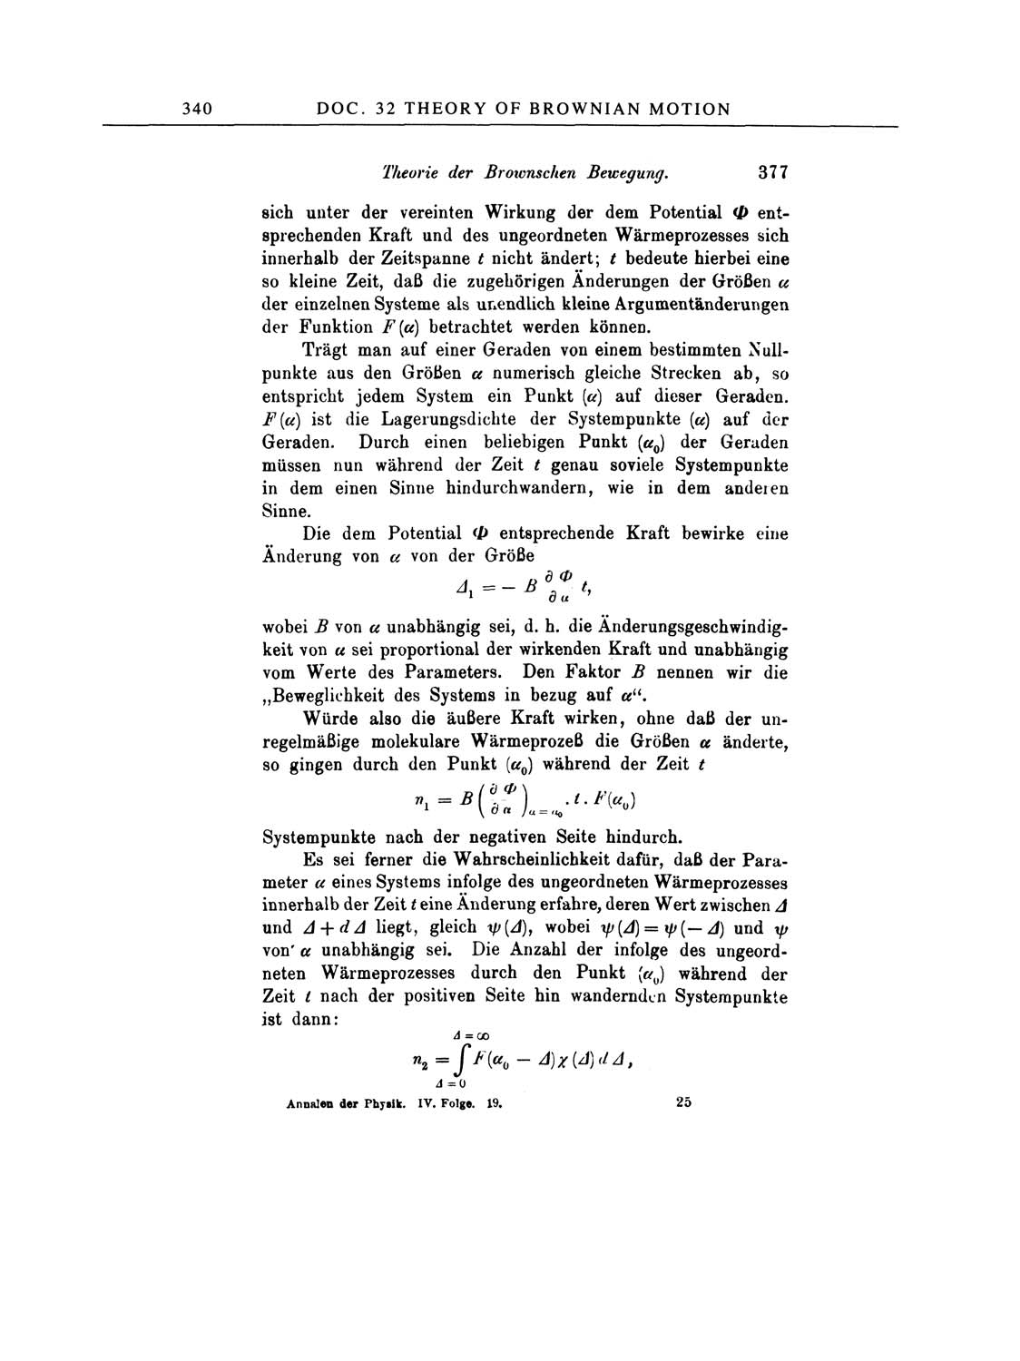 Volume 2: The Swiss Years: Writings, 1900-1909 page 340